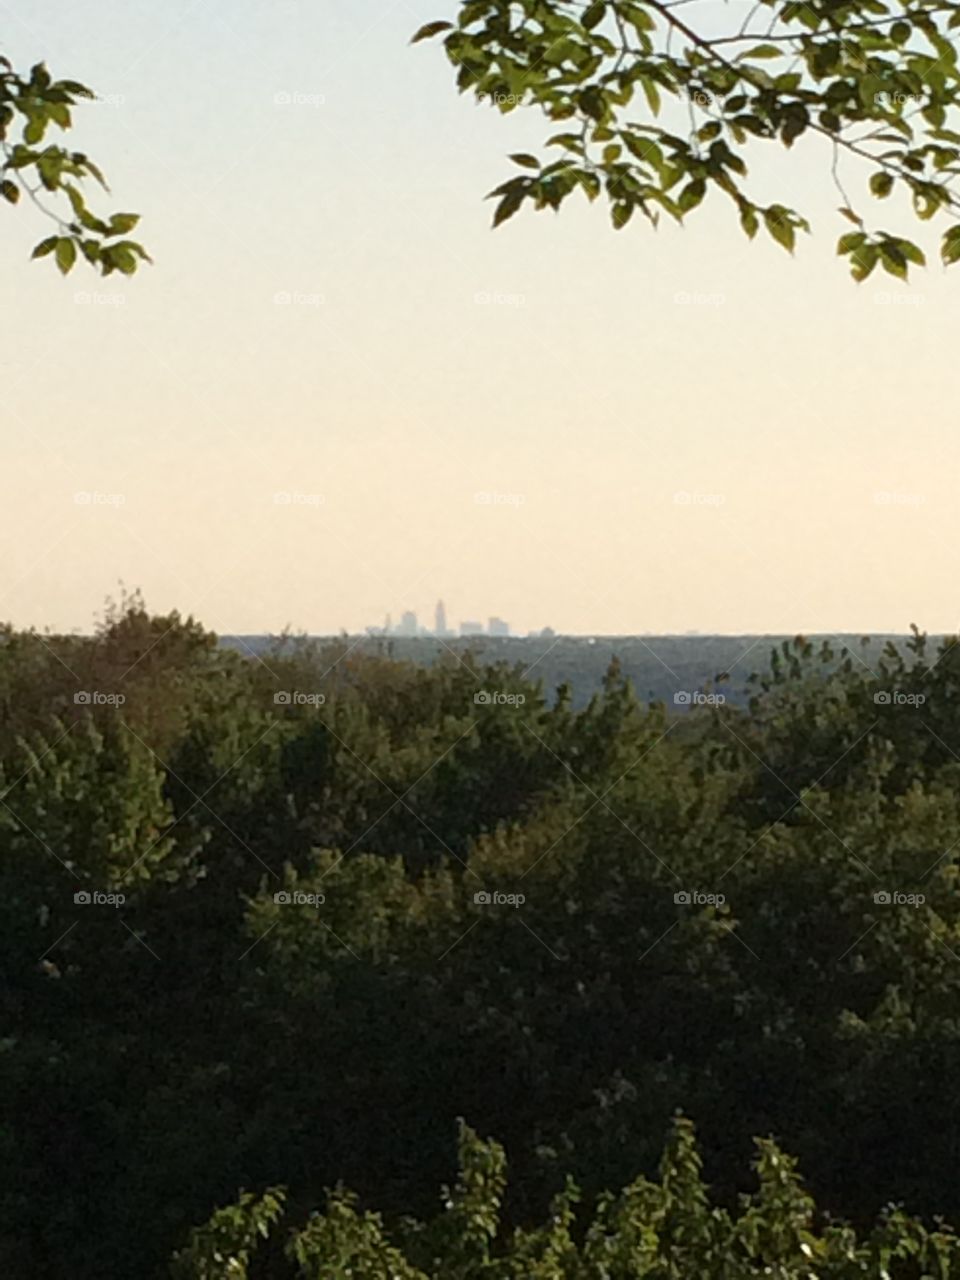 Going For a Hike. Cleveland in the Distance